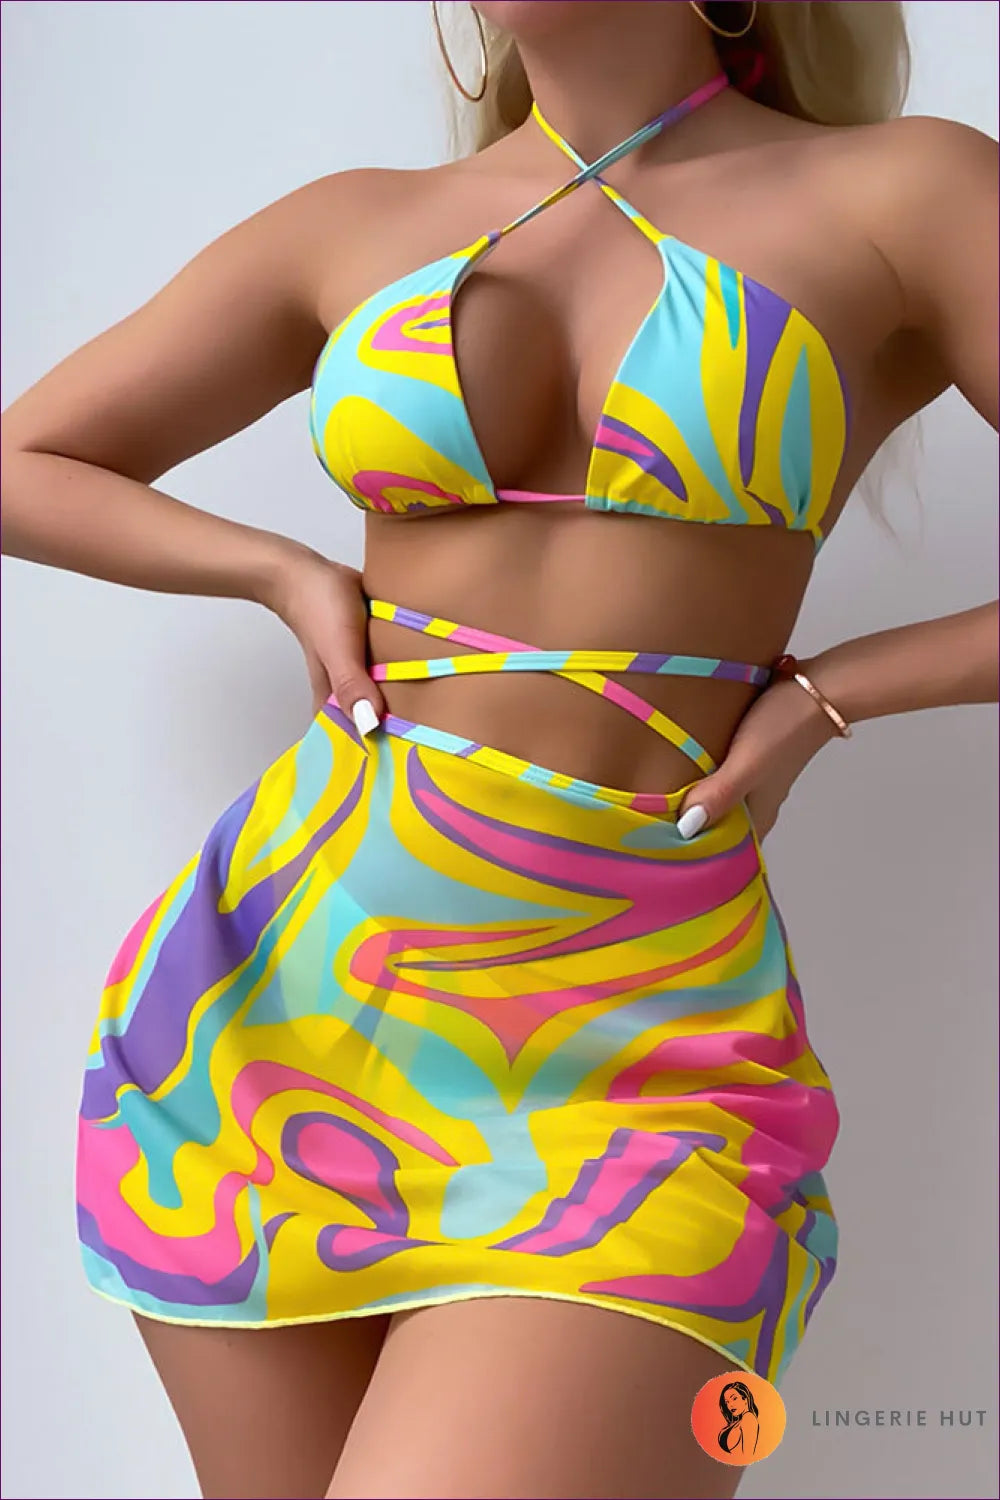 Shop The Vibrant Printed Cross Halterneck Bikini Set - Boho Vacation Chic. Make a Splash In Style And Complete